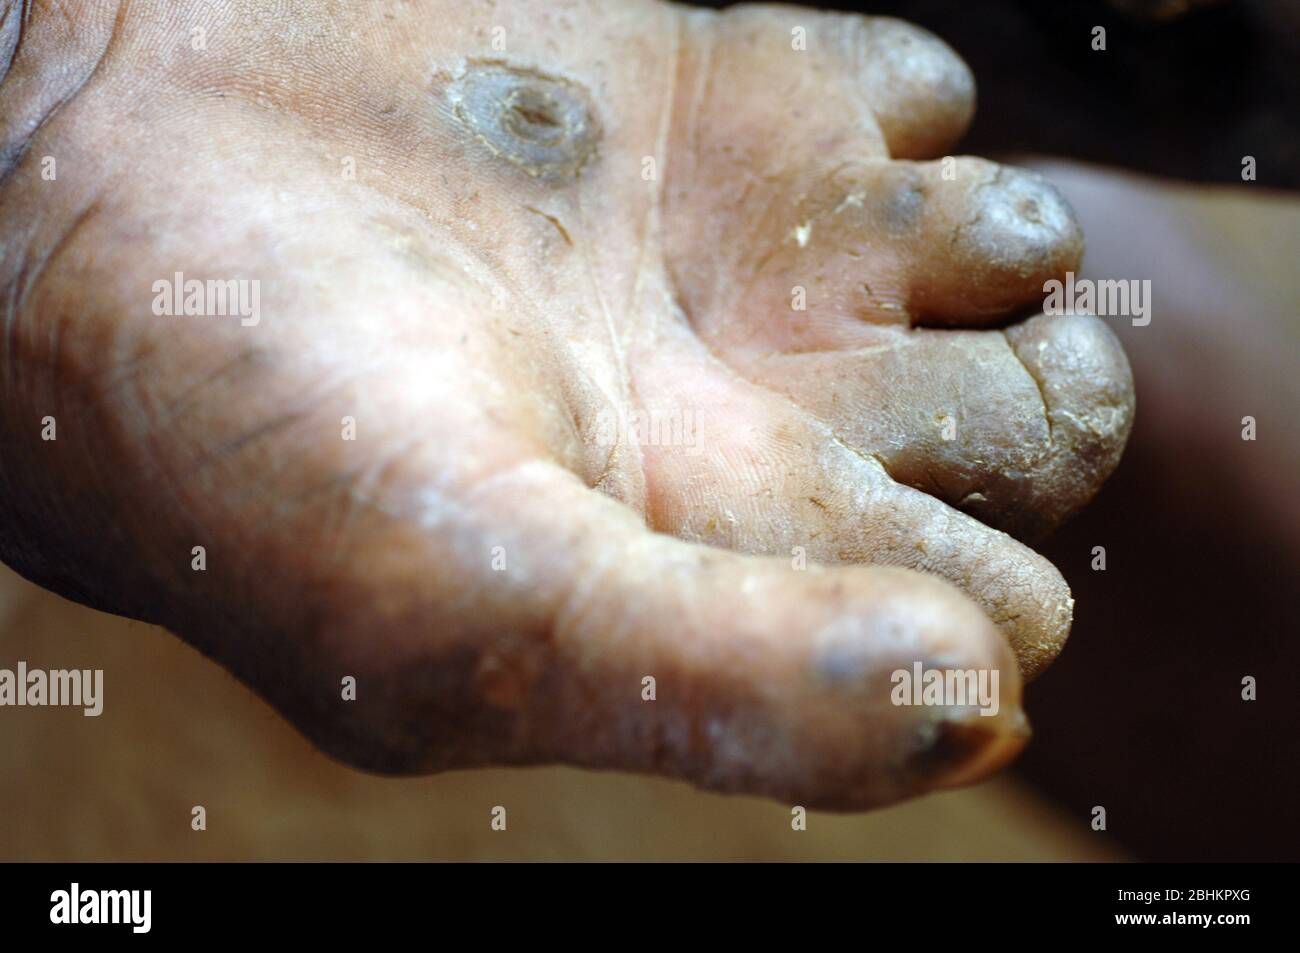 The mutilated hands of an elderly man suffering from leprosy. Leprosy (Hansen’s disease) is a chronic infectious disease caused by Mycobacterium lepra Stock Photo